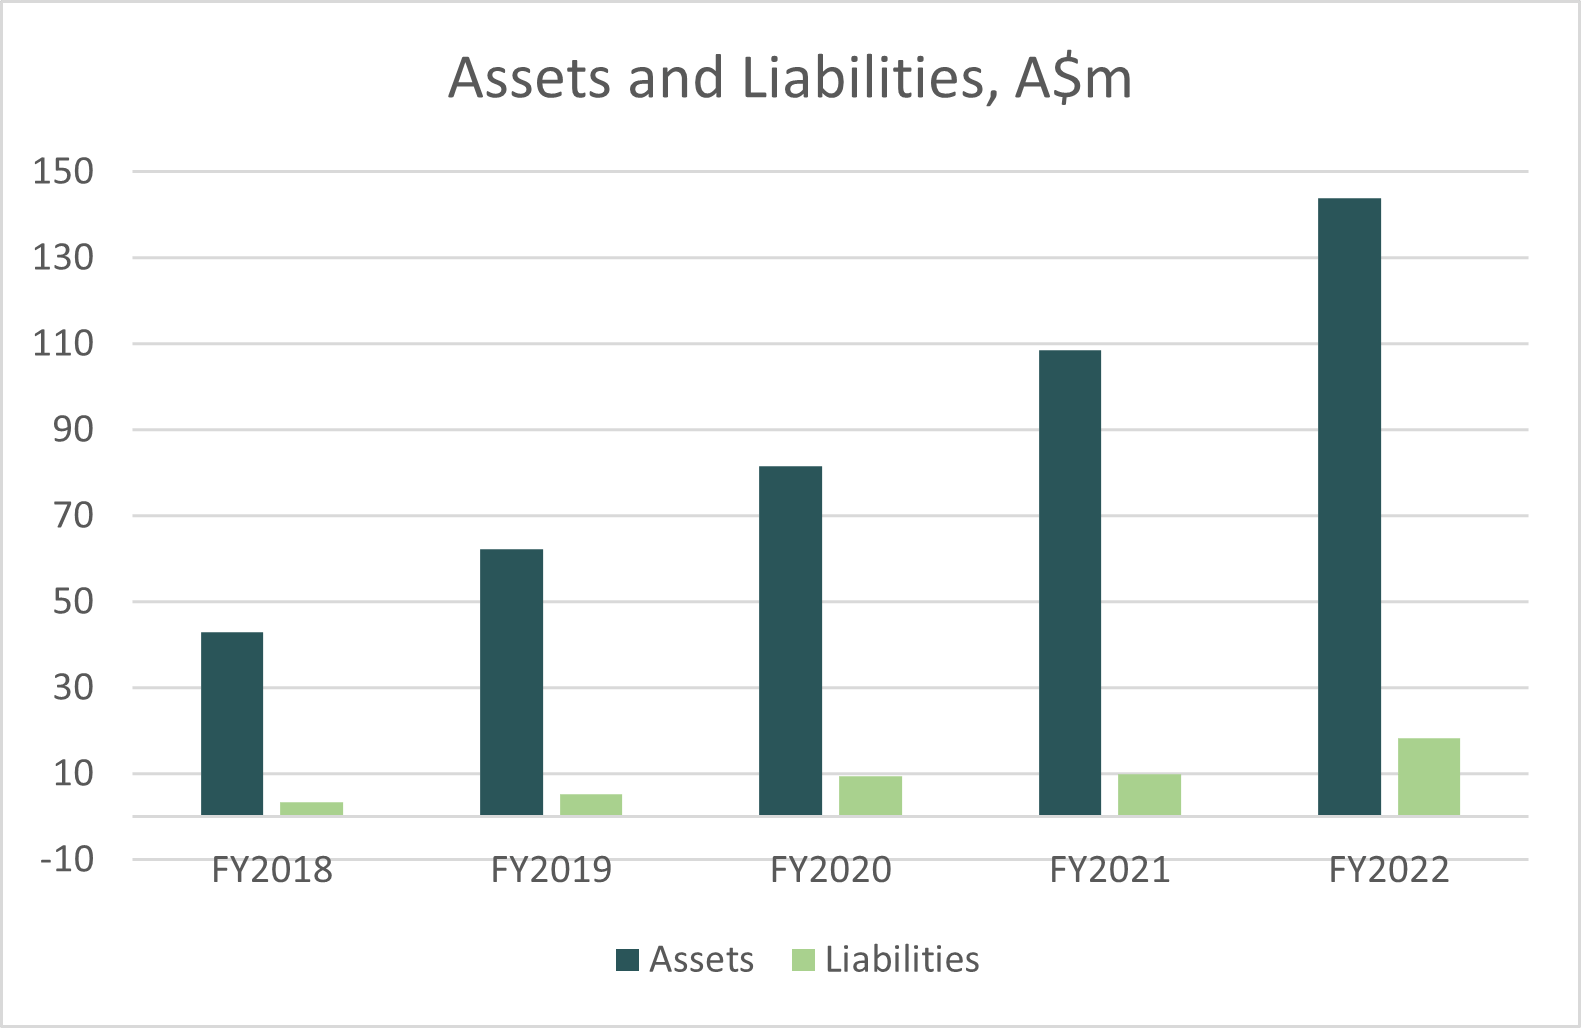 Graph 2022: Assets and Liabilities